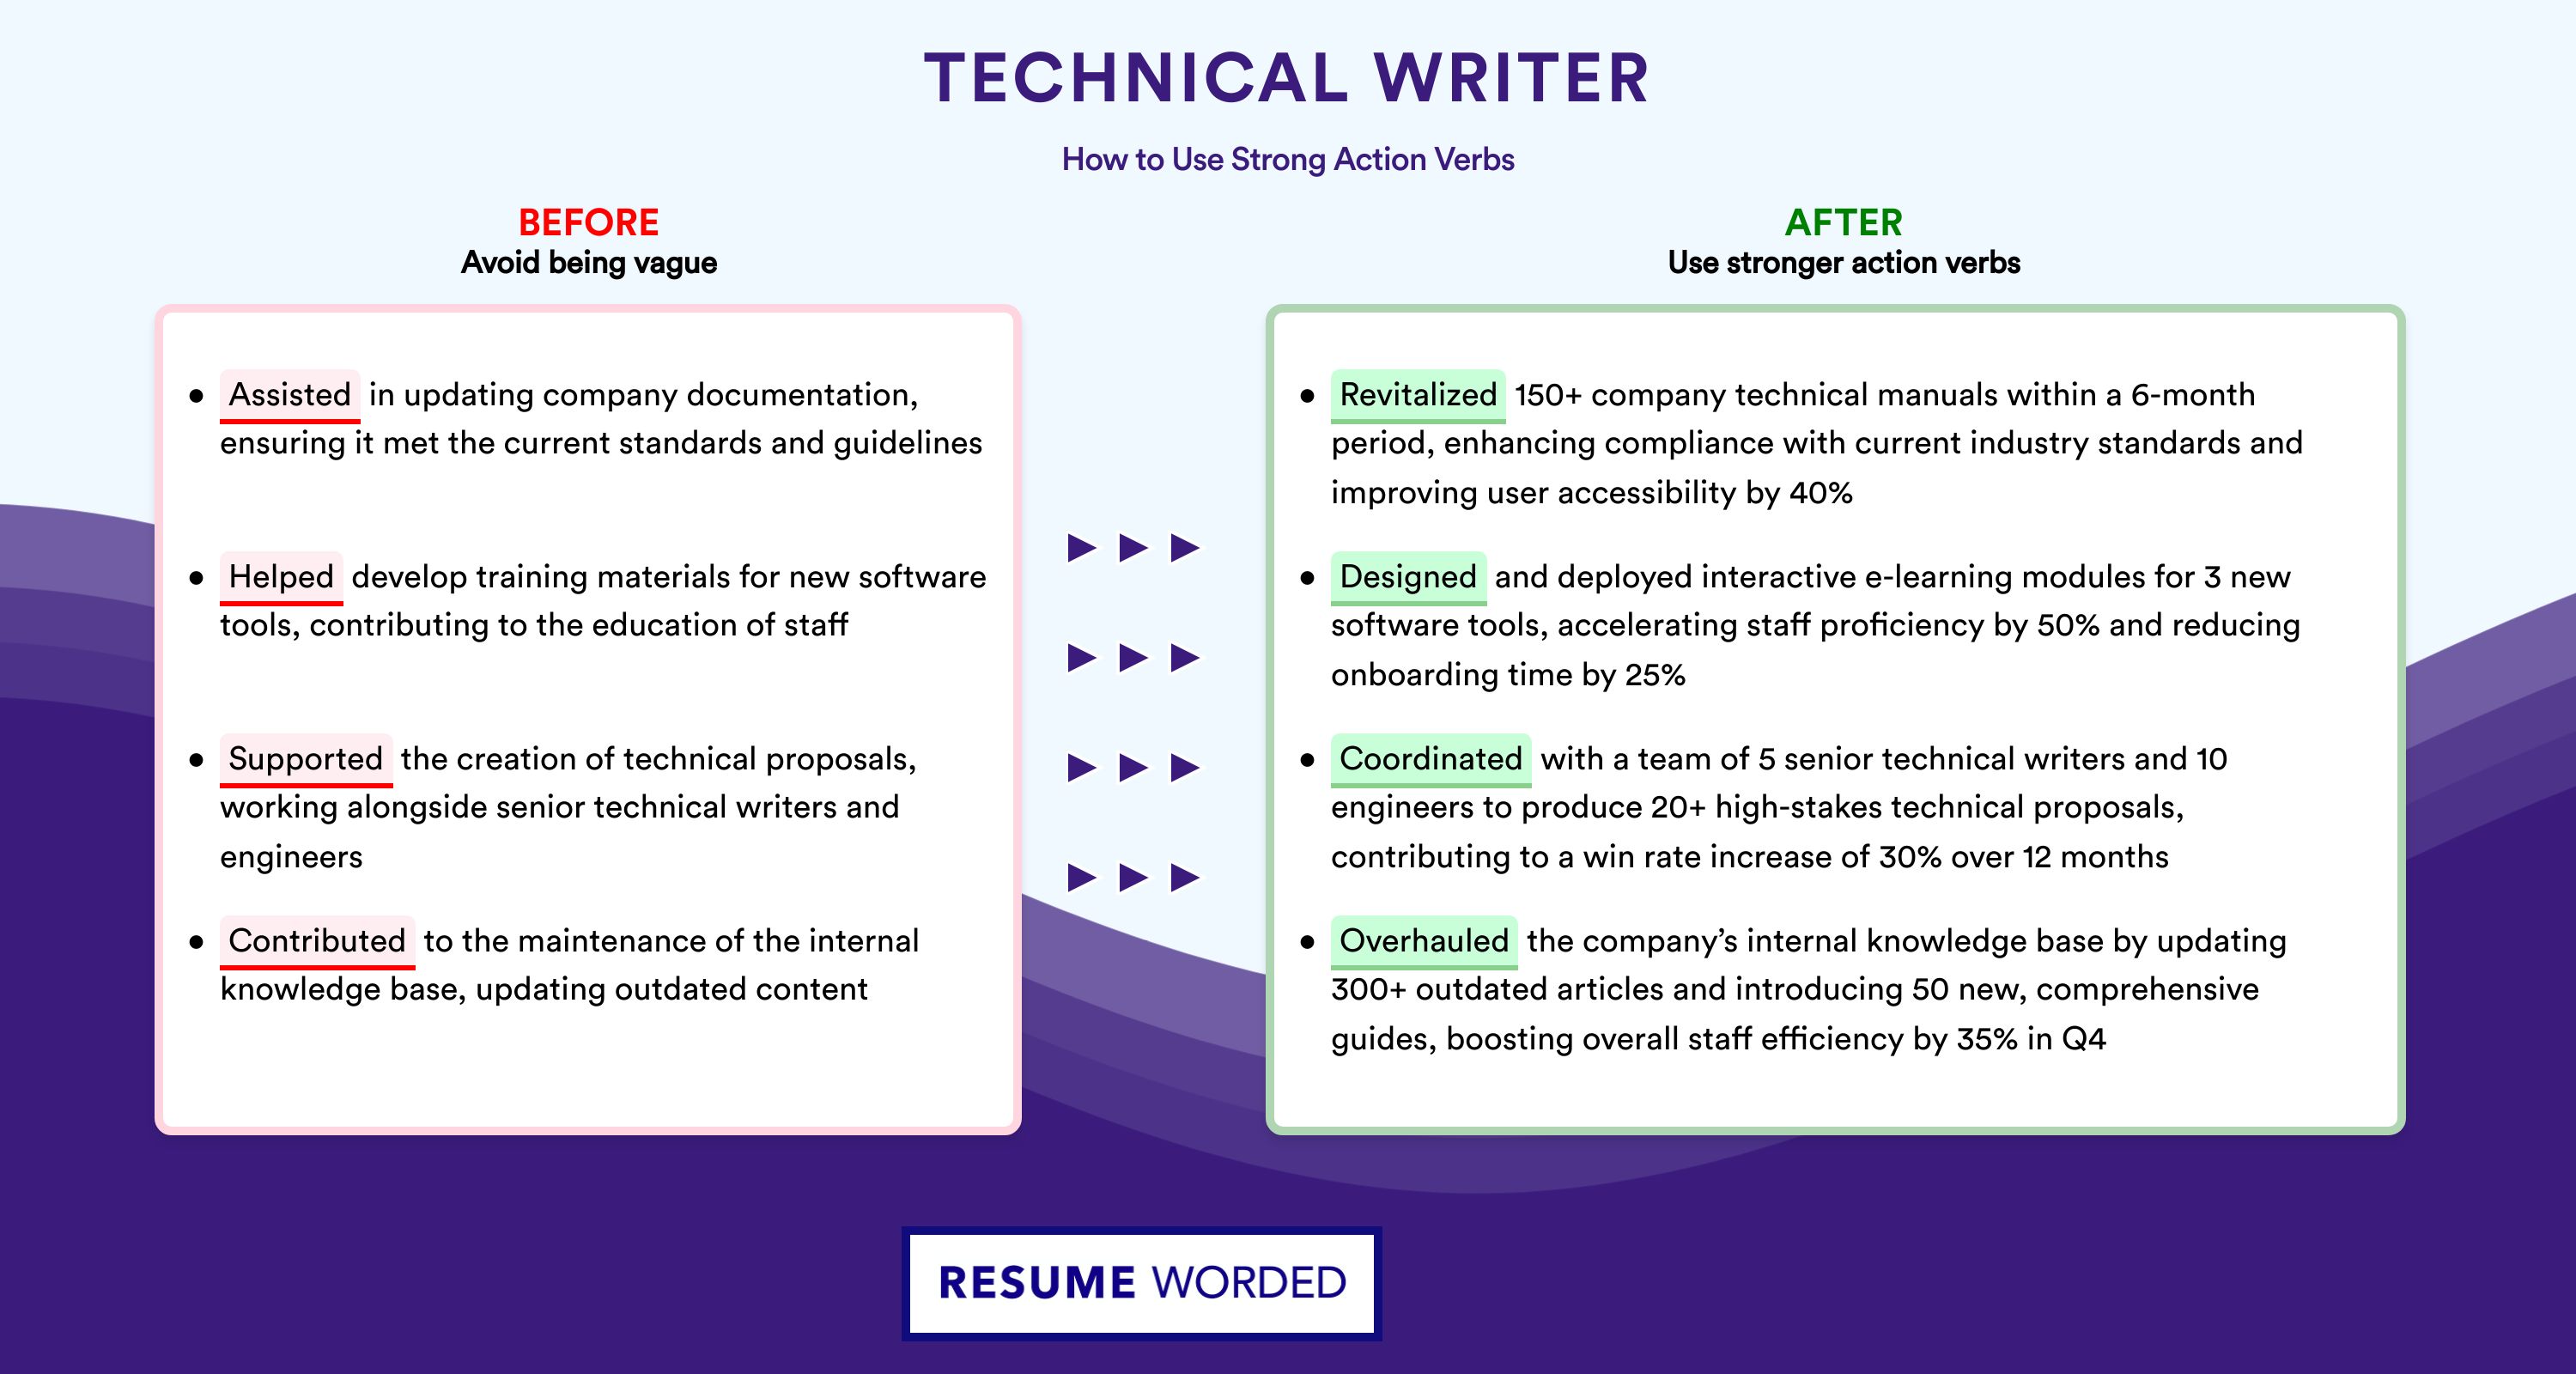 Action Verbs for Technical Writer